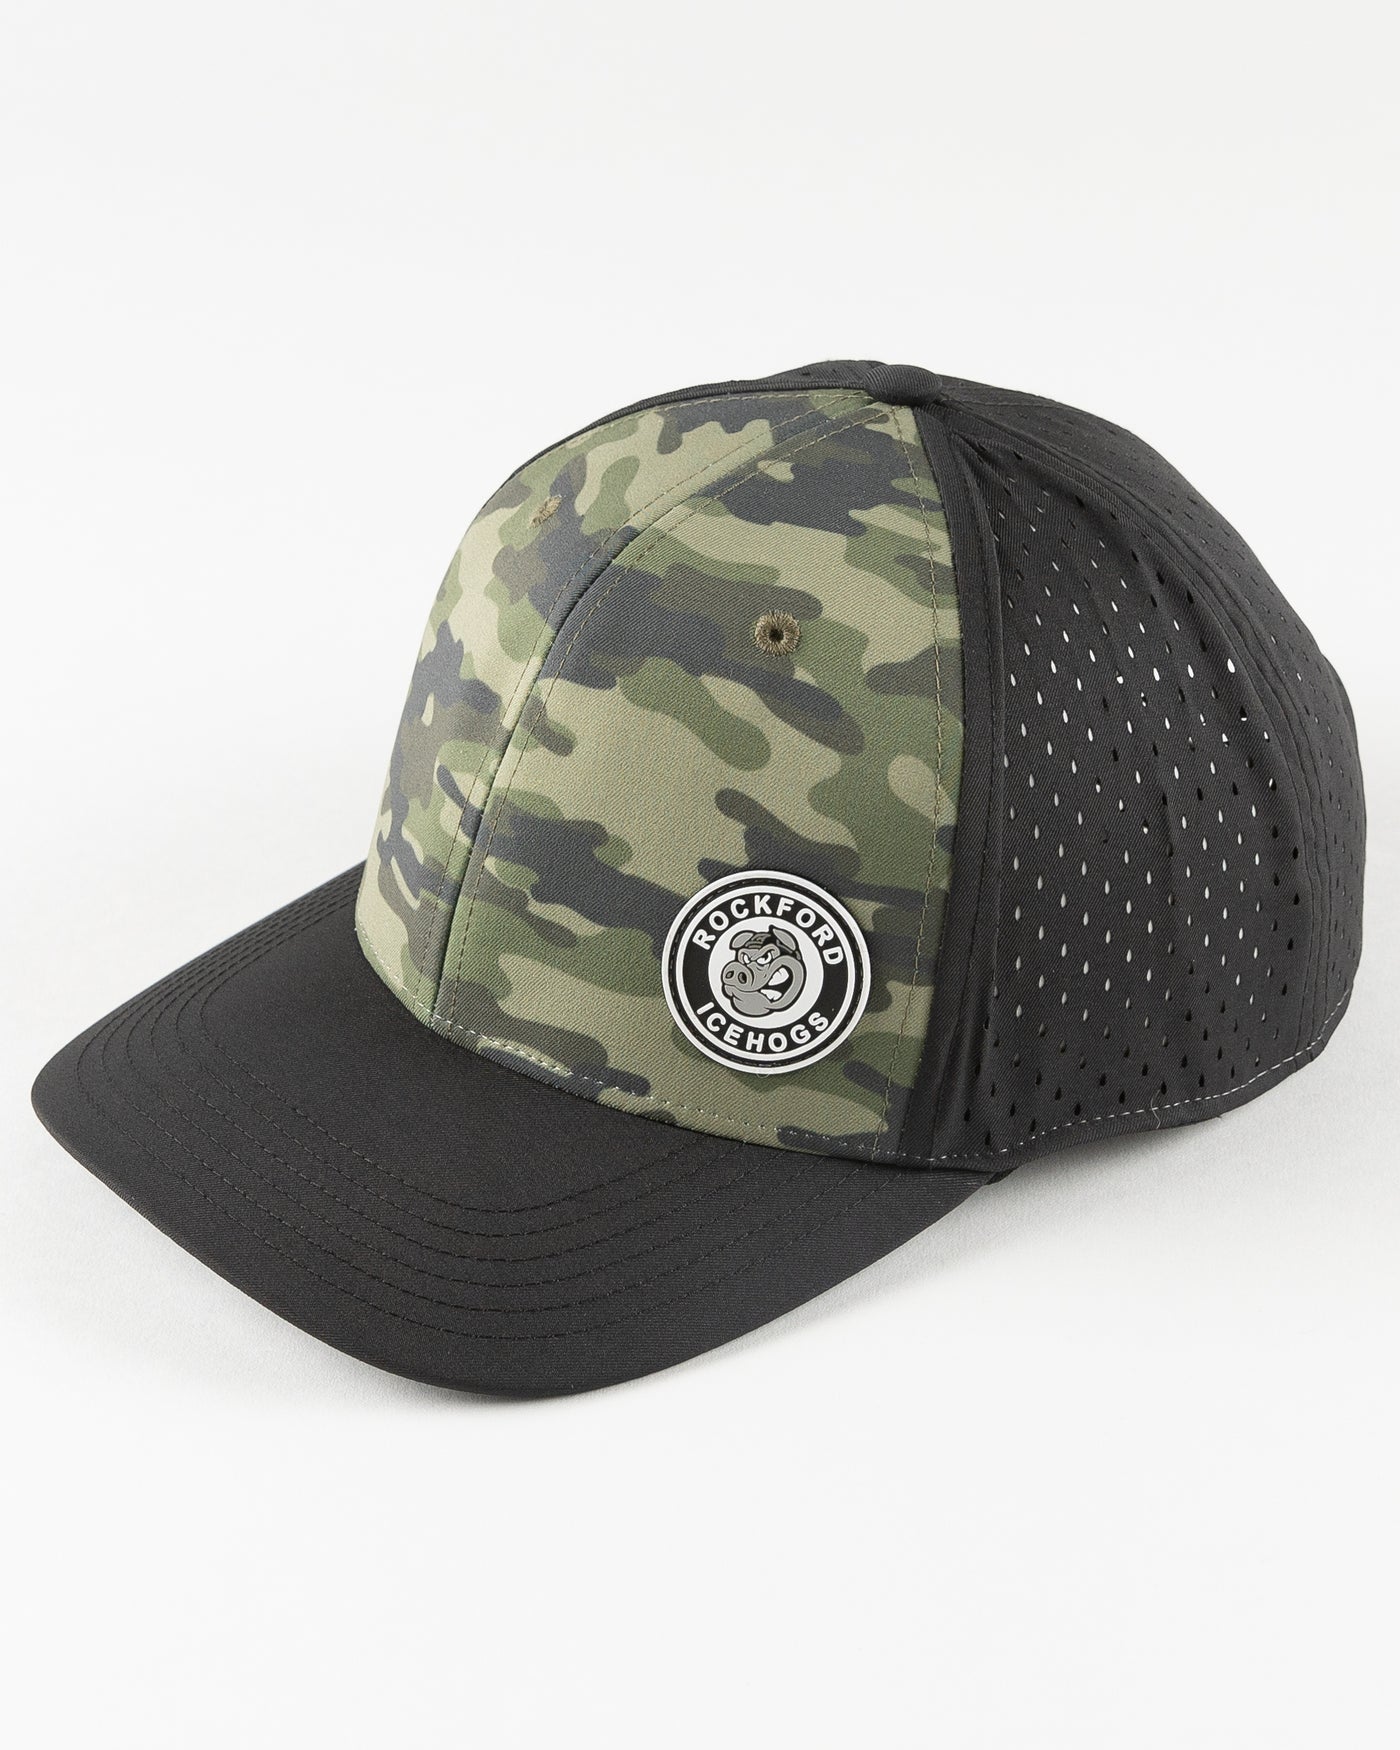 black and camo Rockford IceHogs adjustable cap - left angle lay flat